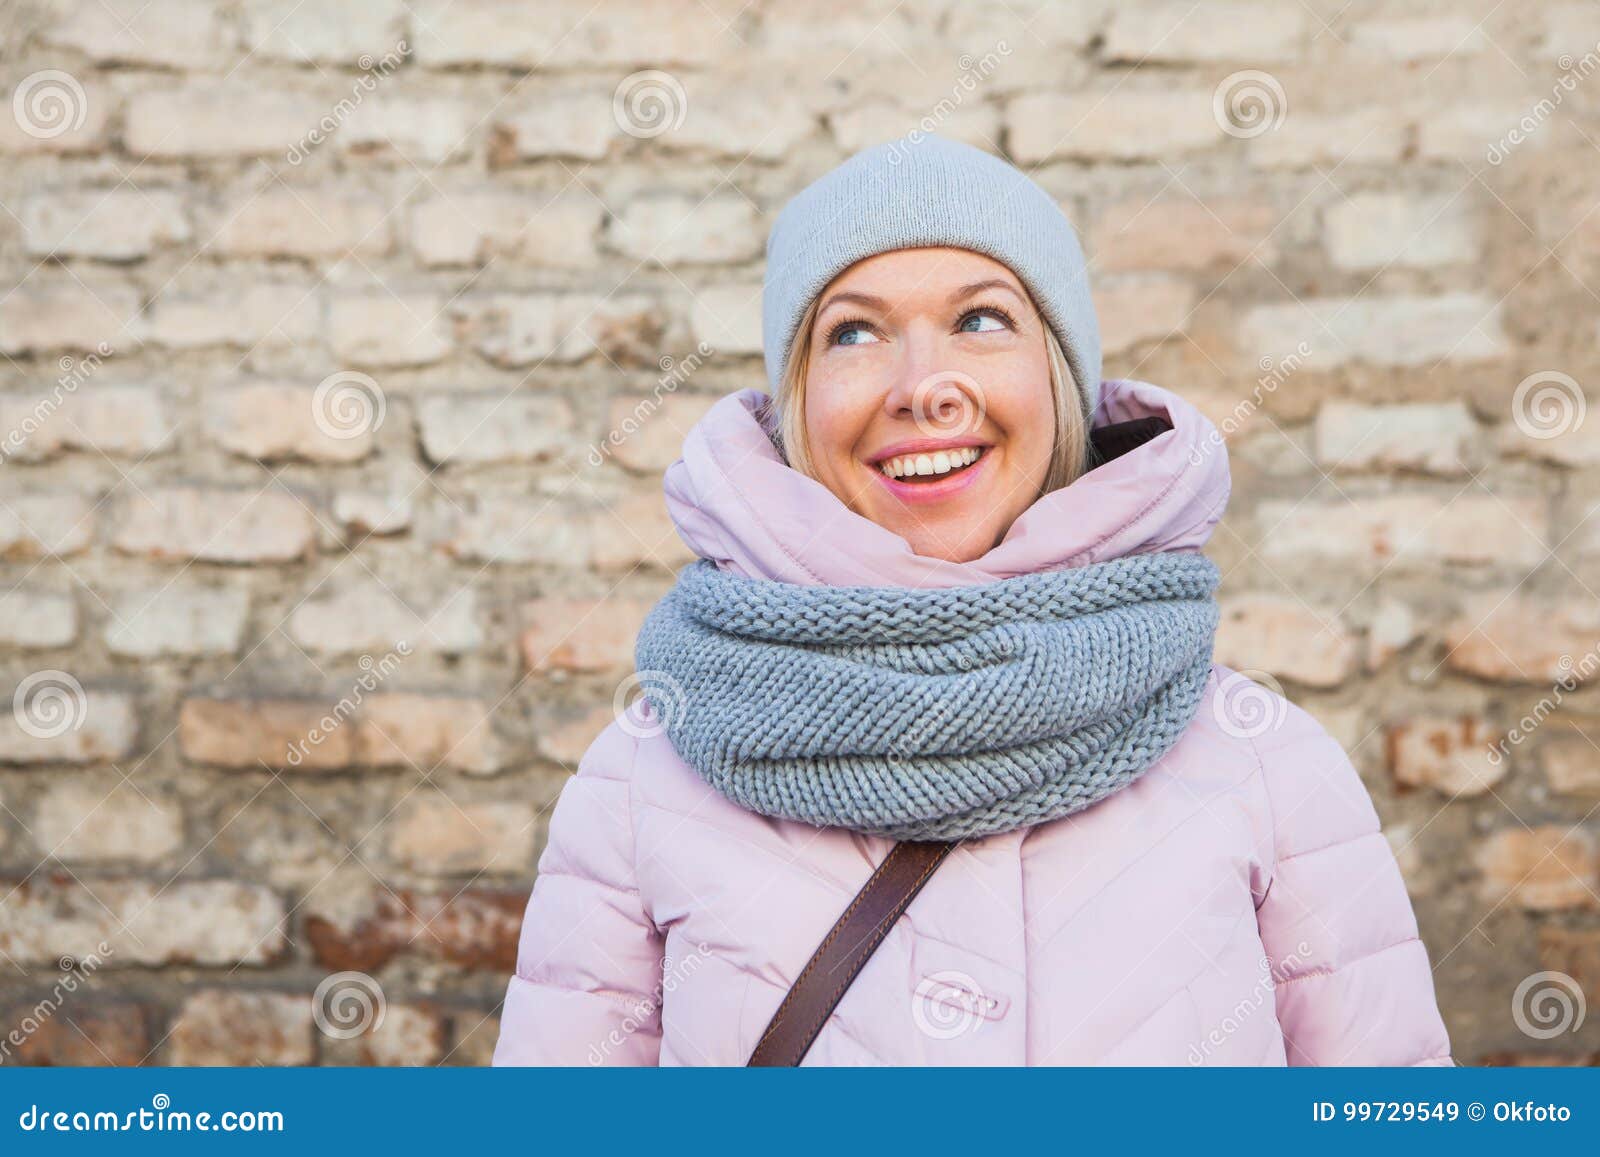 Closeup Winter Portrait of a Smiling Woman in Knitted Scarf Stock Image ...